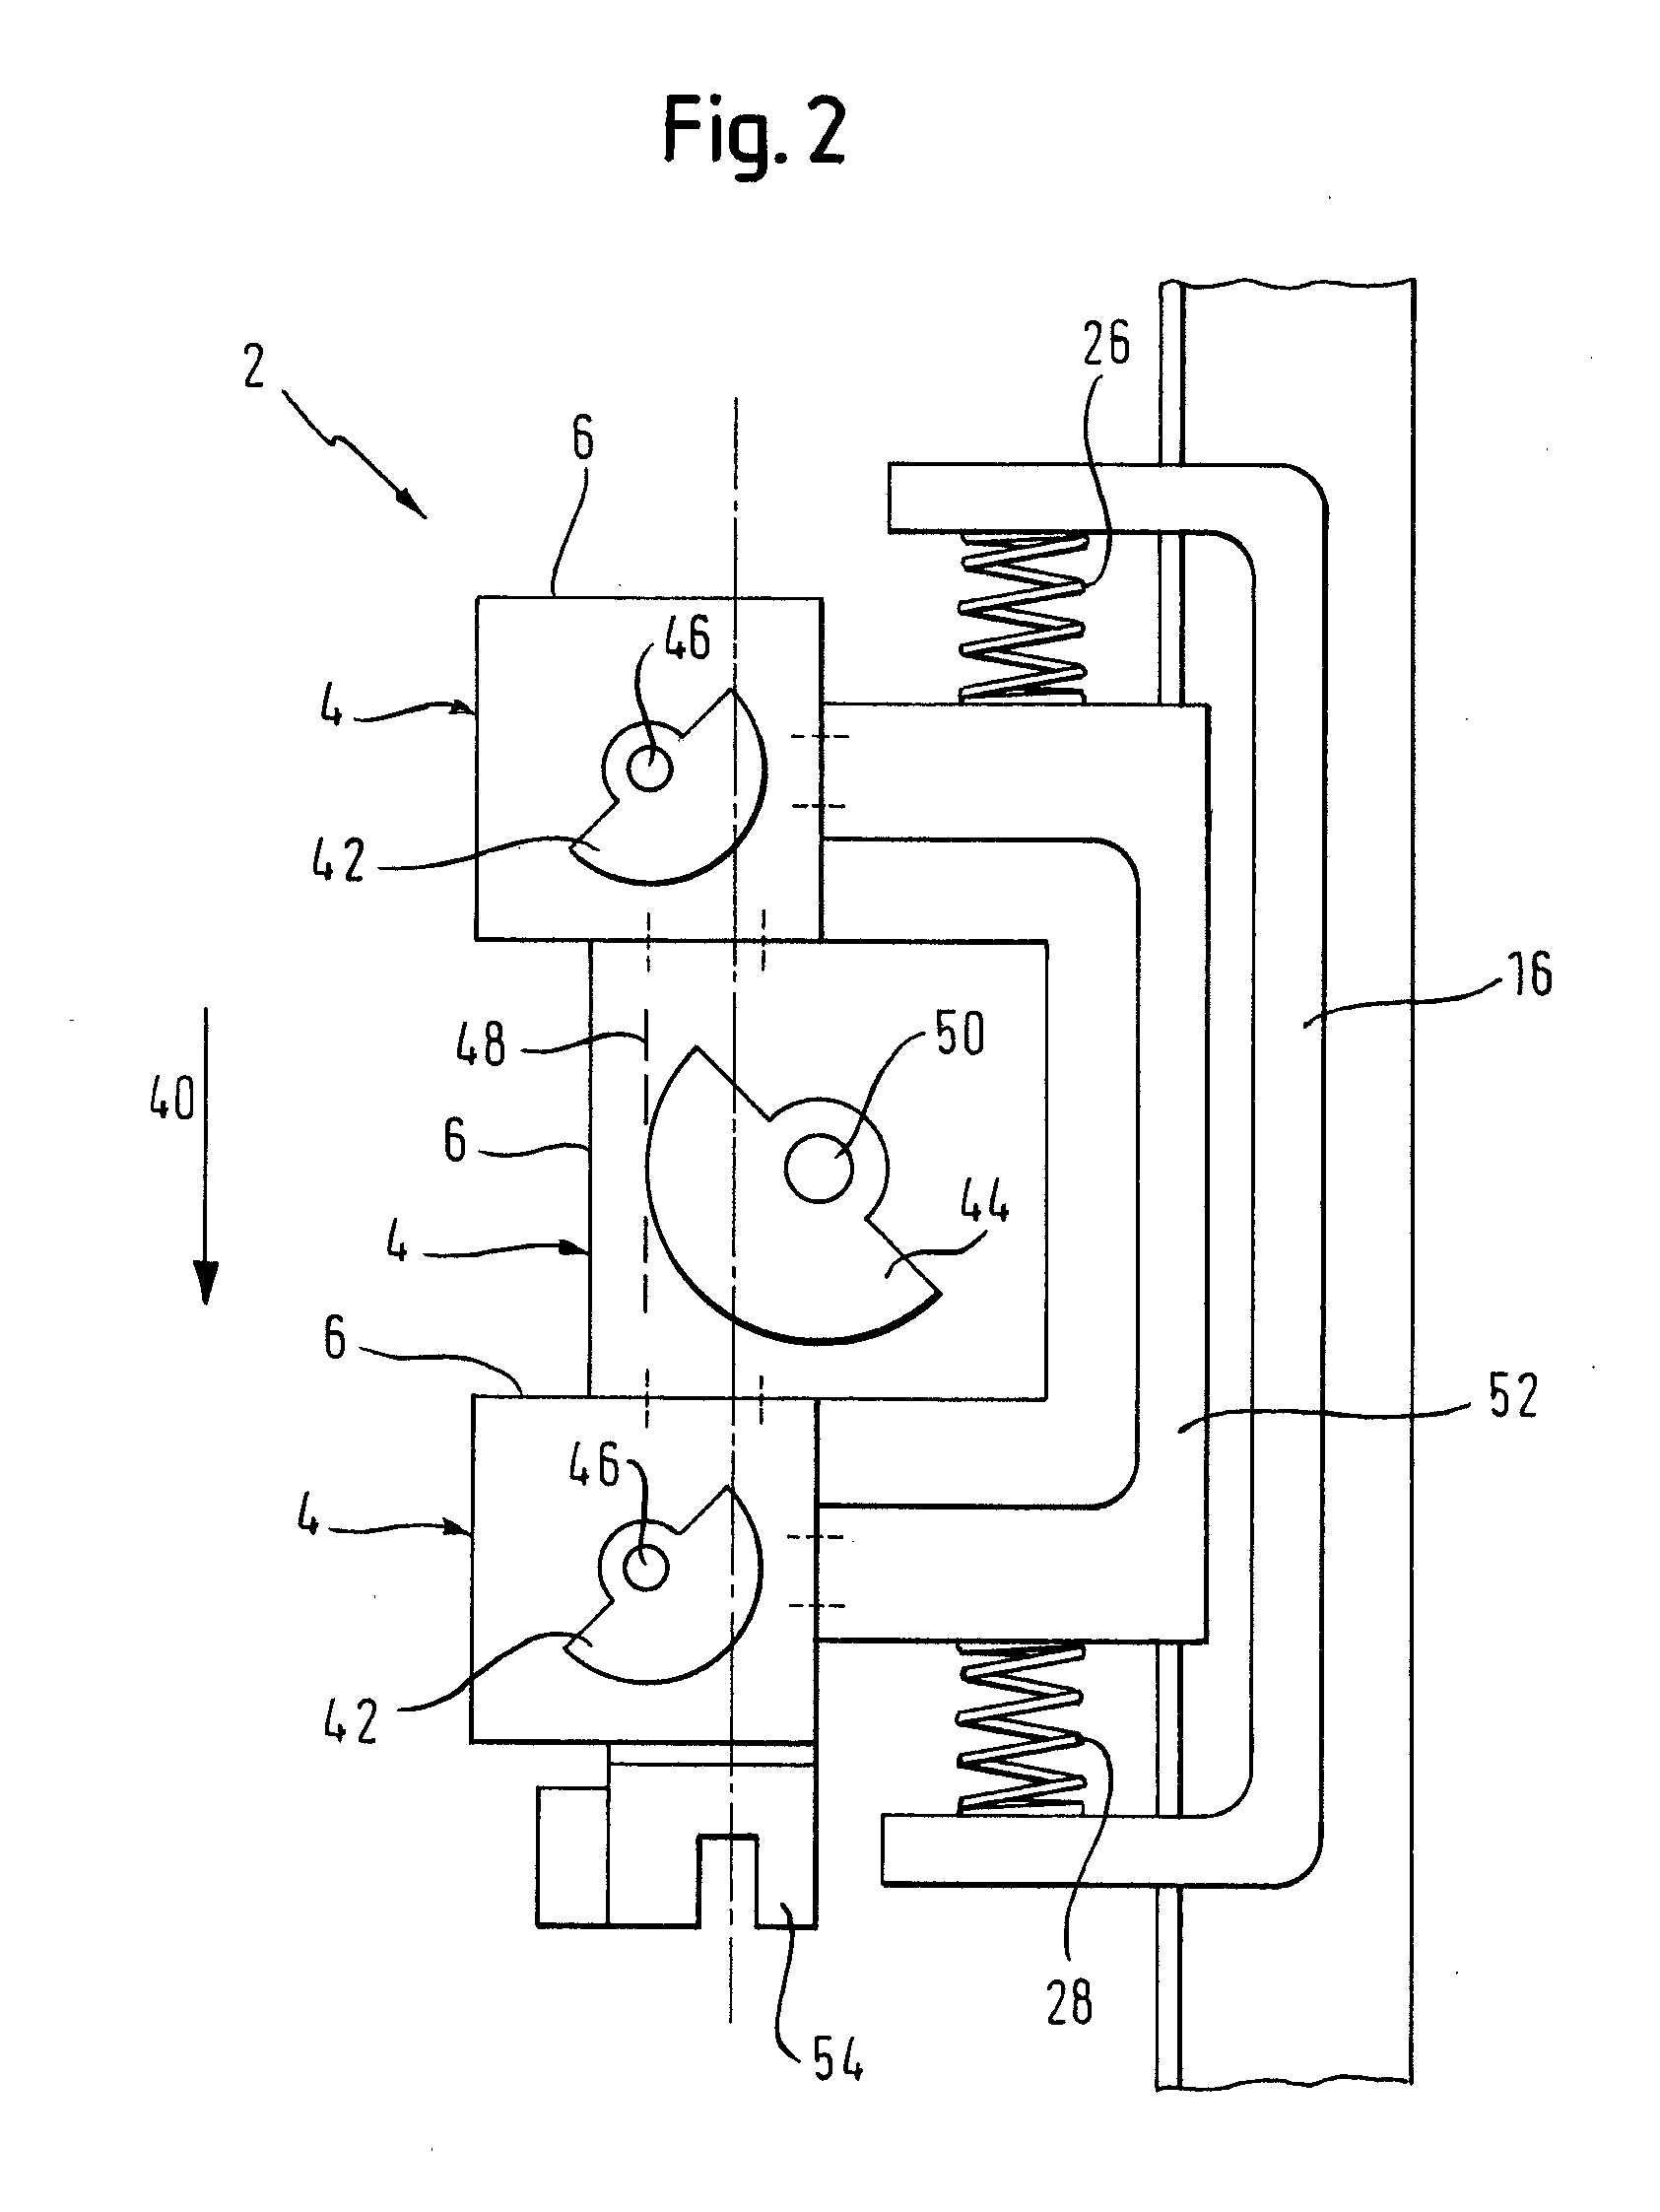 Device for a Vibration Generator